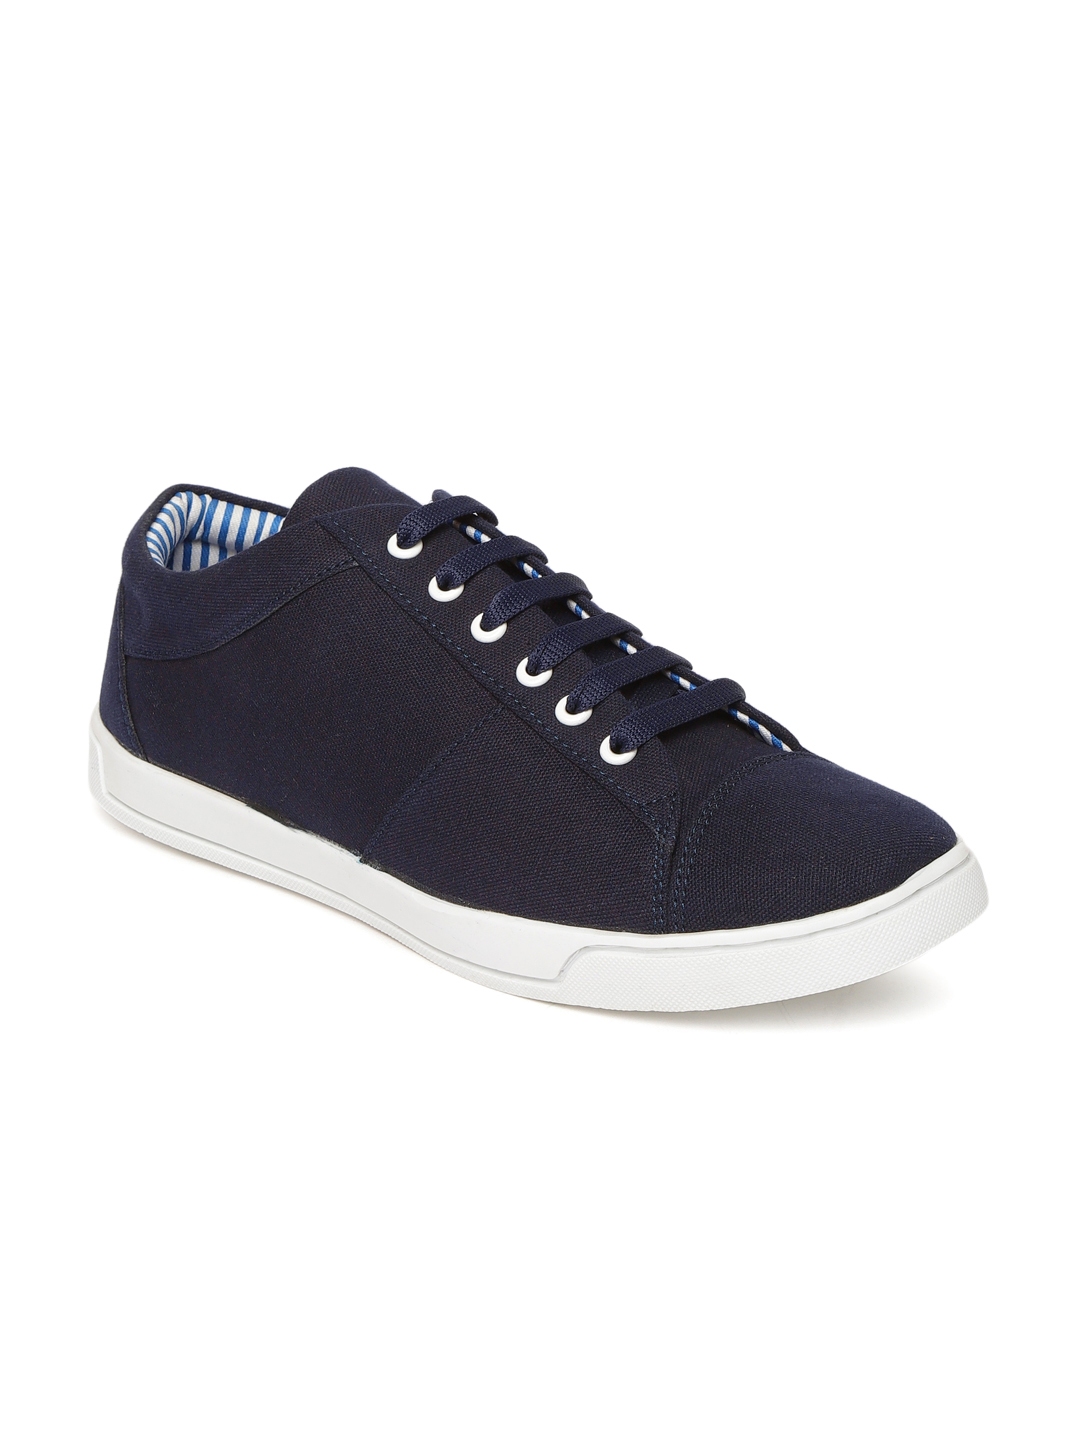 Buy People Men Navy Blue Solid Sneakers - Casual Shoes for Men 8800133 ...